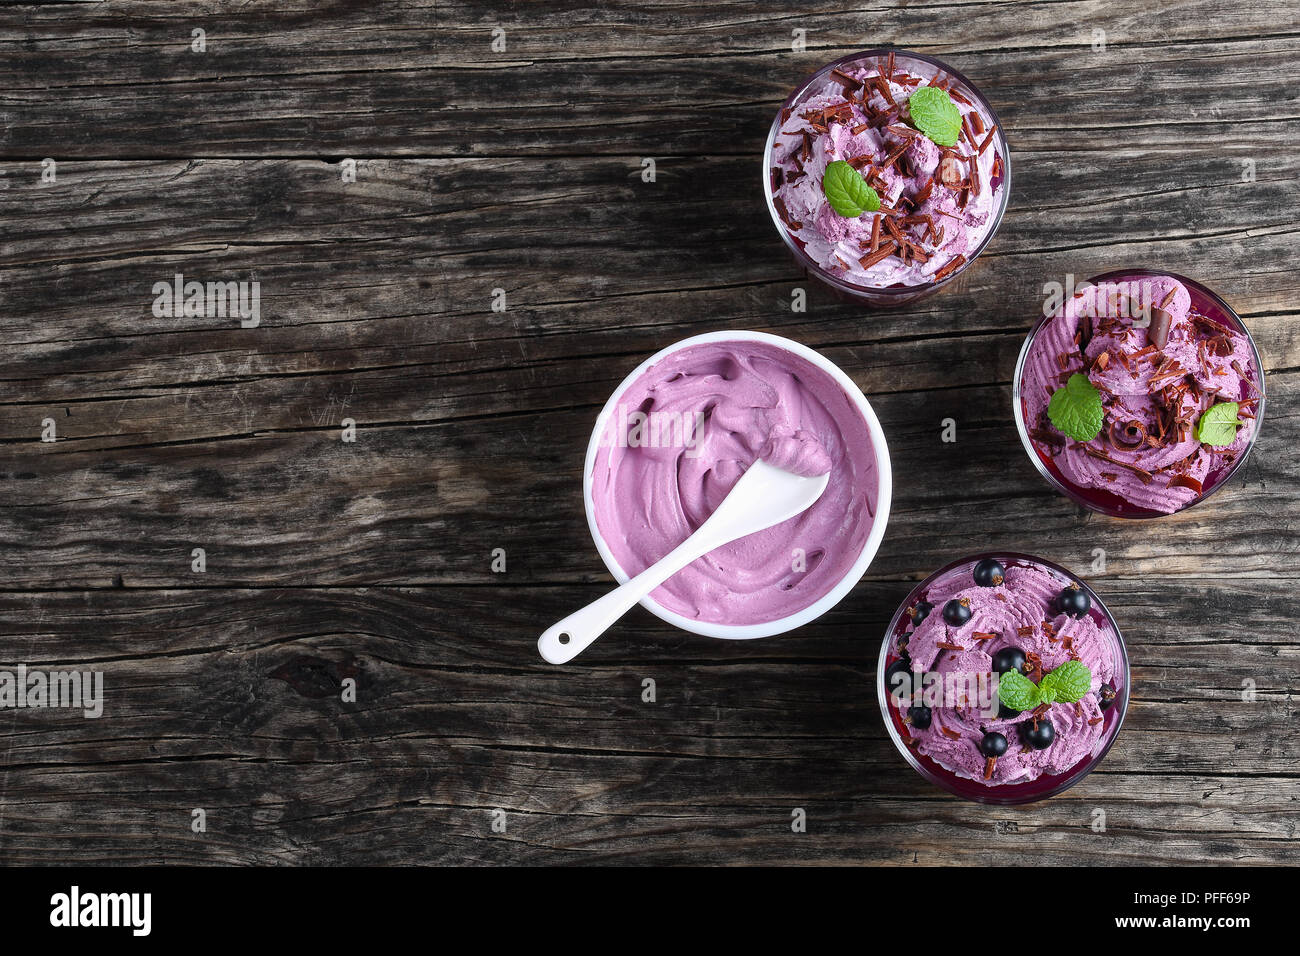 delicious healthy summer dessert of blackcurrant decorated with mint leaves in glass cups on old dark wooden table, Frozen whipped cream ricotta Yogur Stock Photo